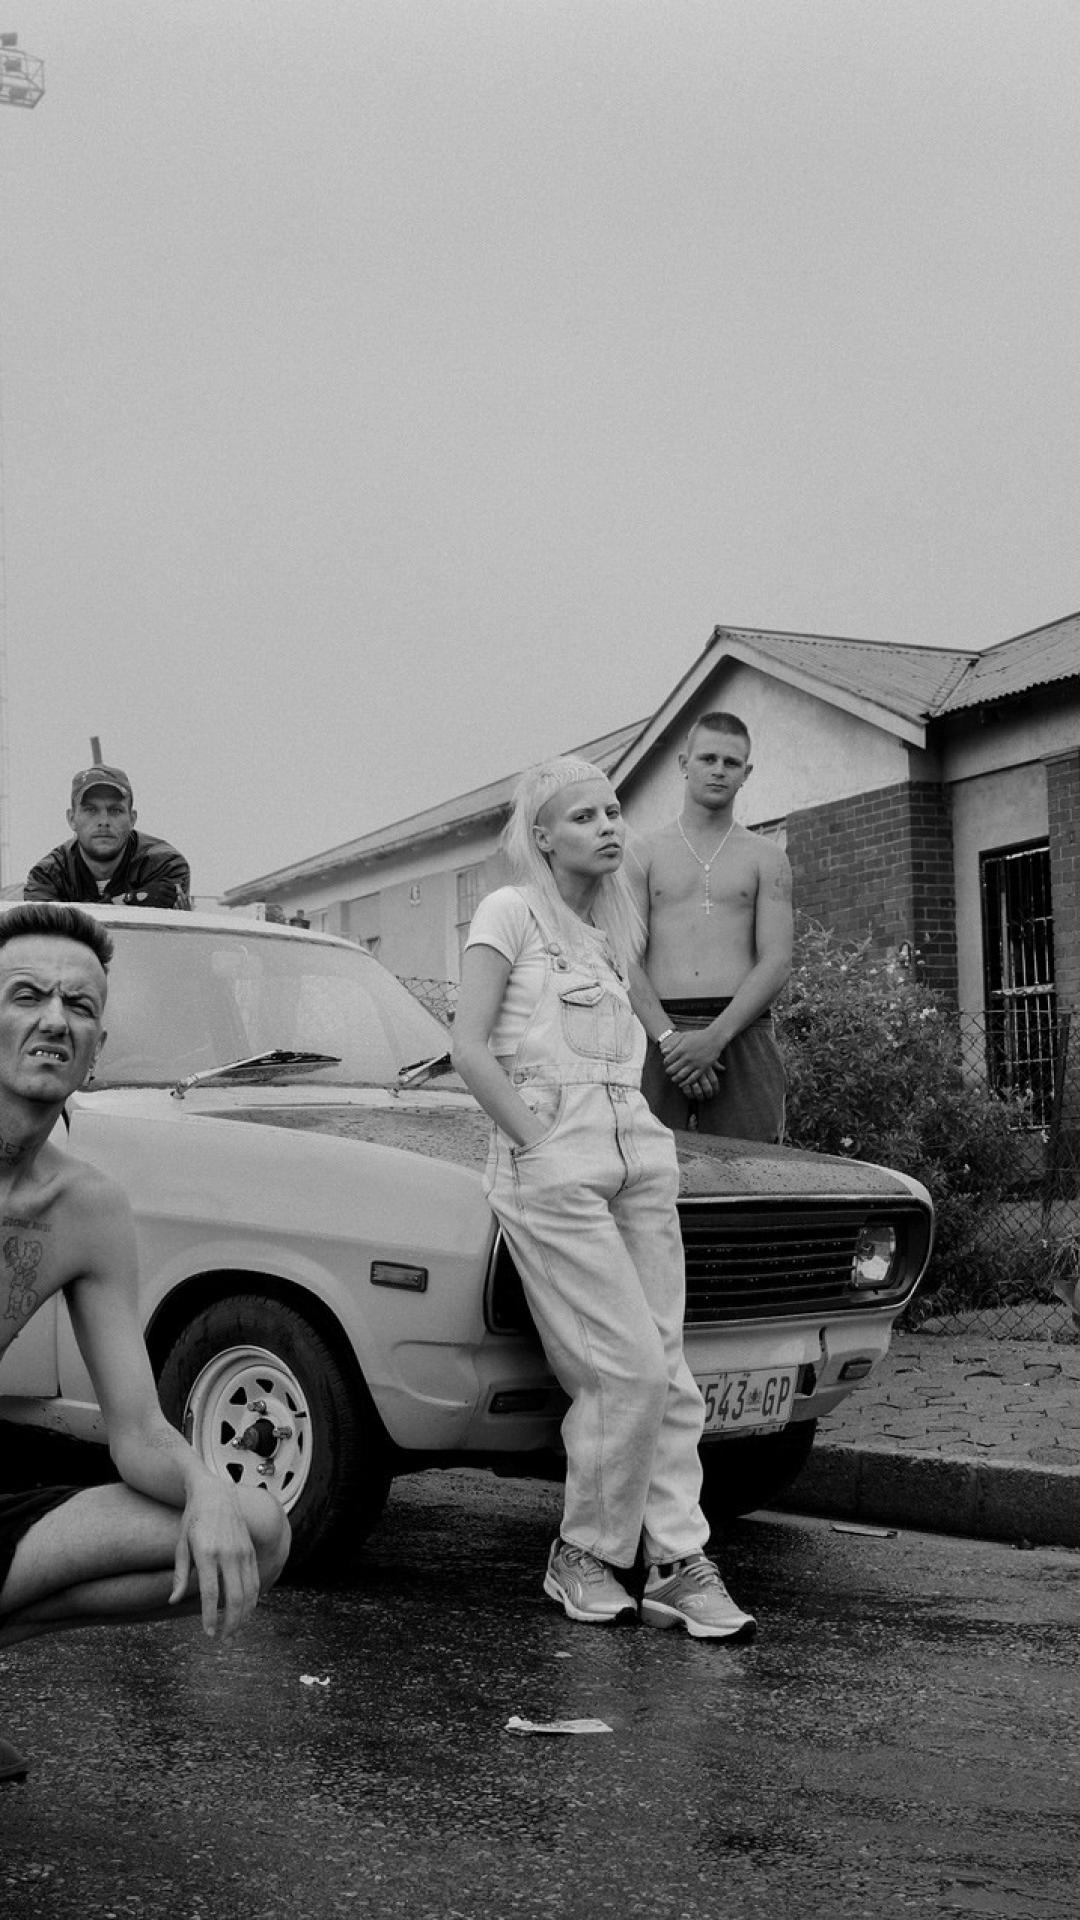 Die Antwoord: Made their international debut in 2009 with the release of their album "$O$". 1080x1920 Full HD Wallpaper.